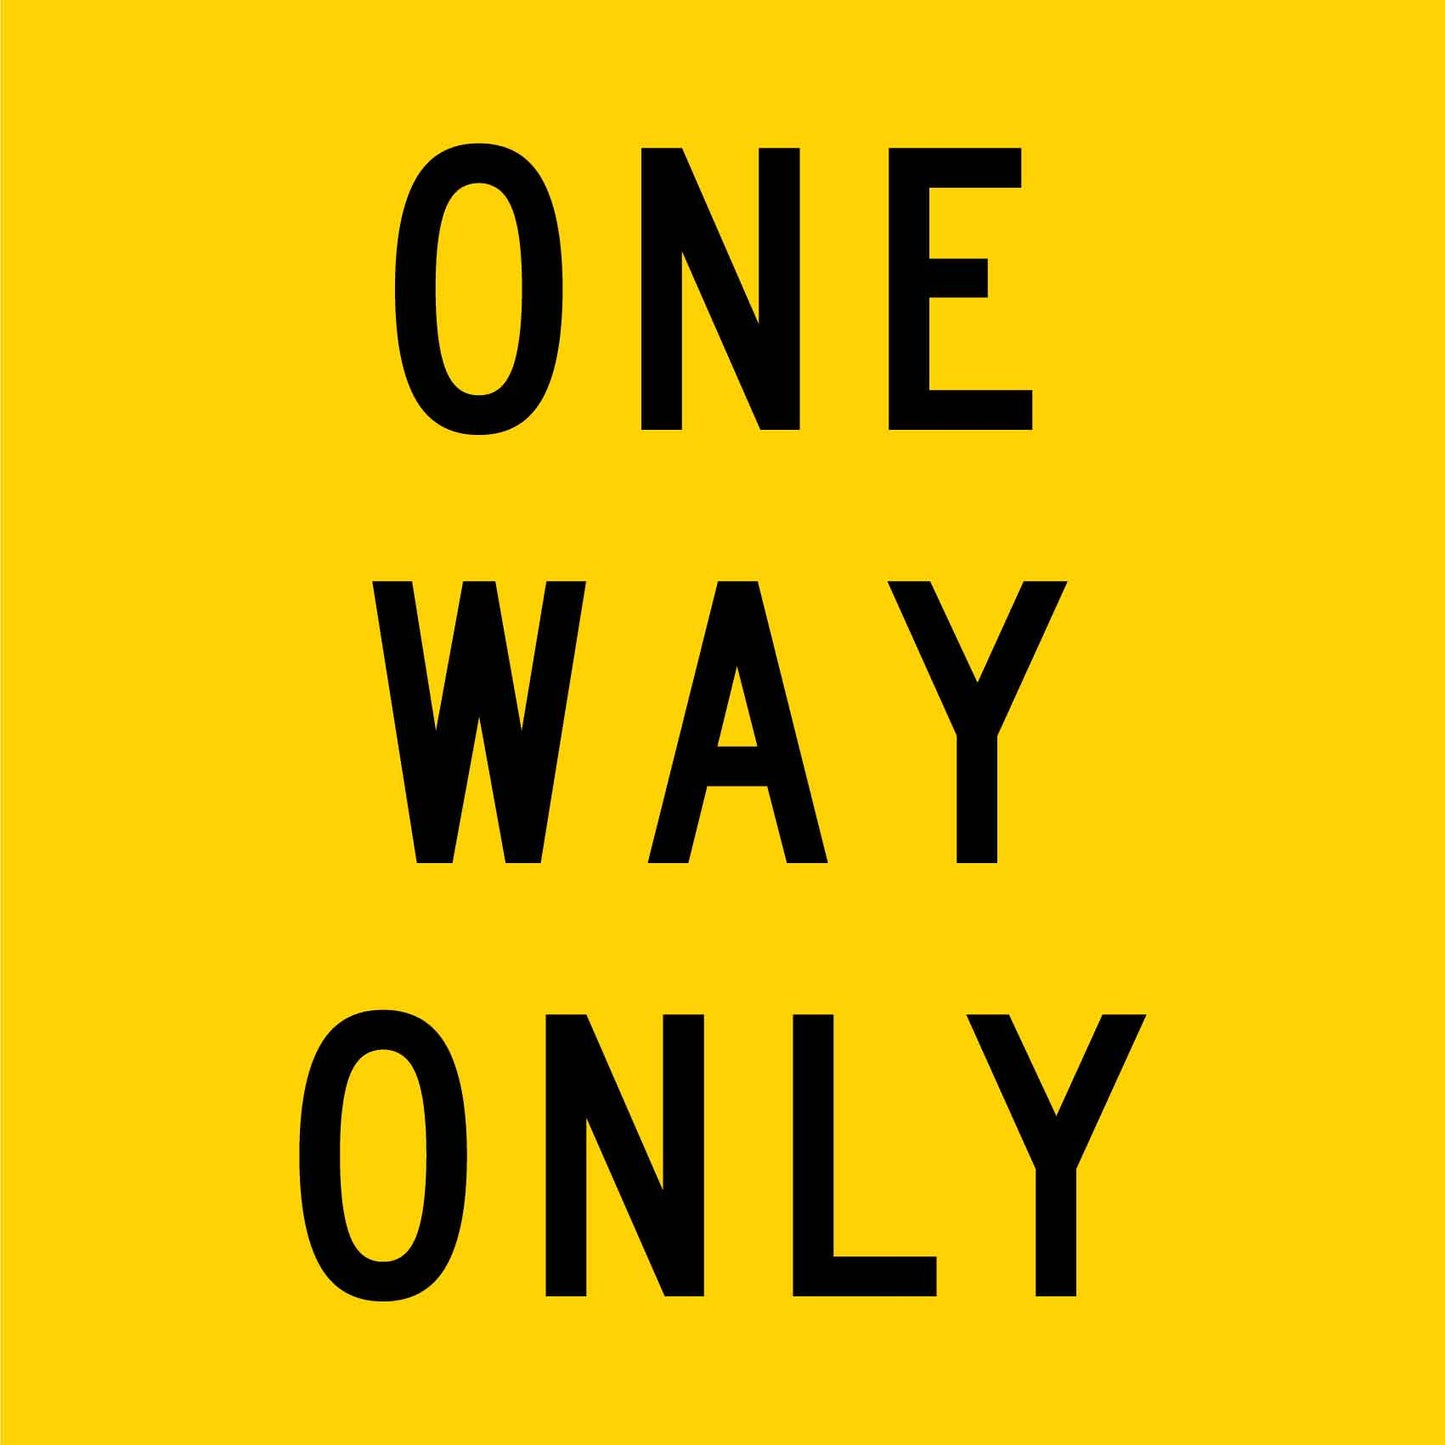 One Way Only Multi Message Reflective Traffic Sign